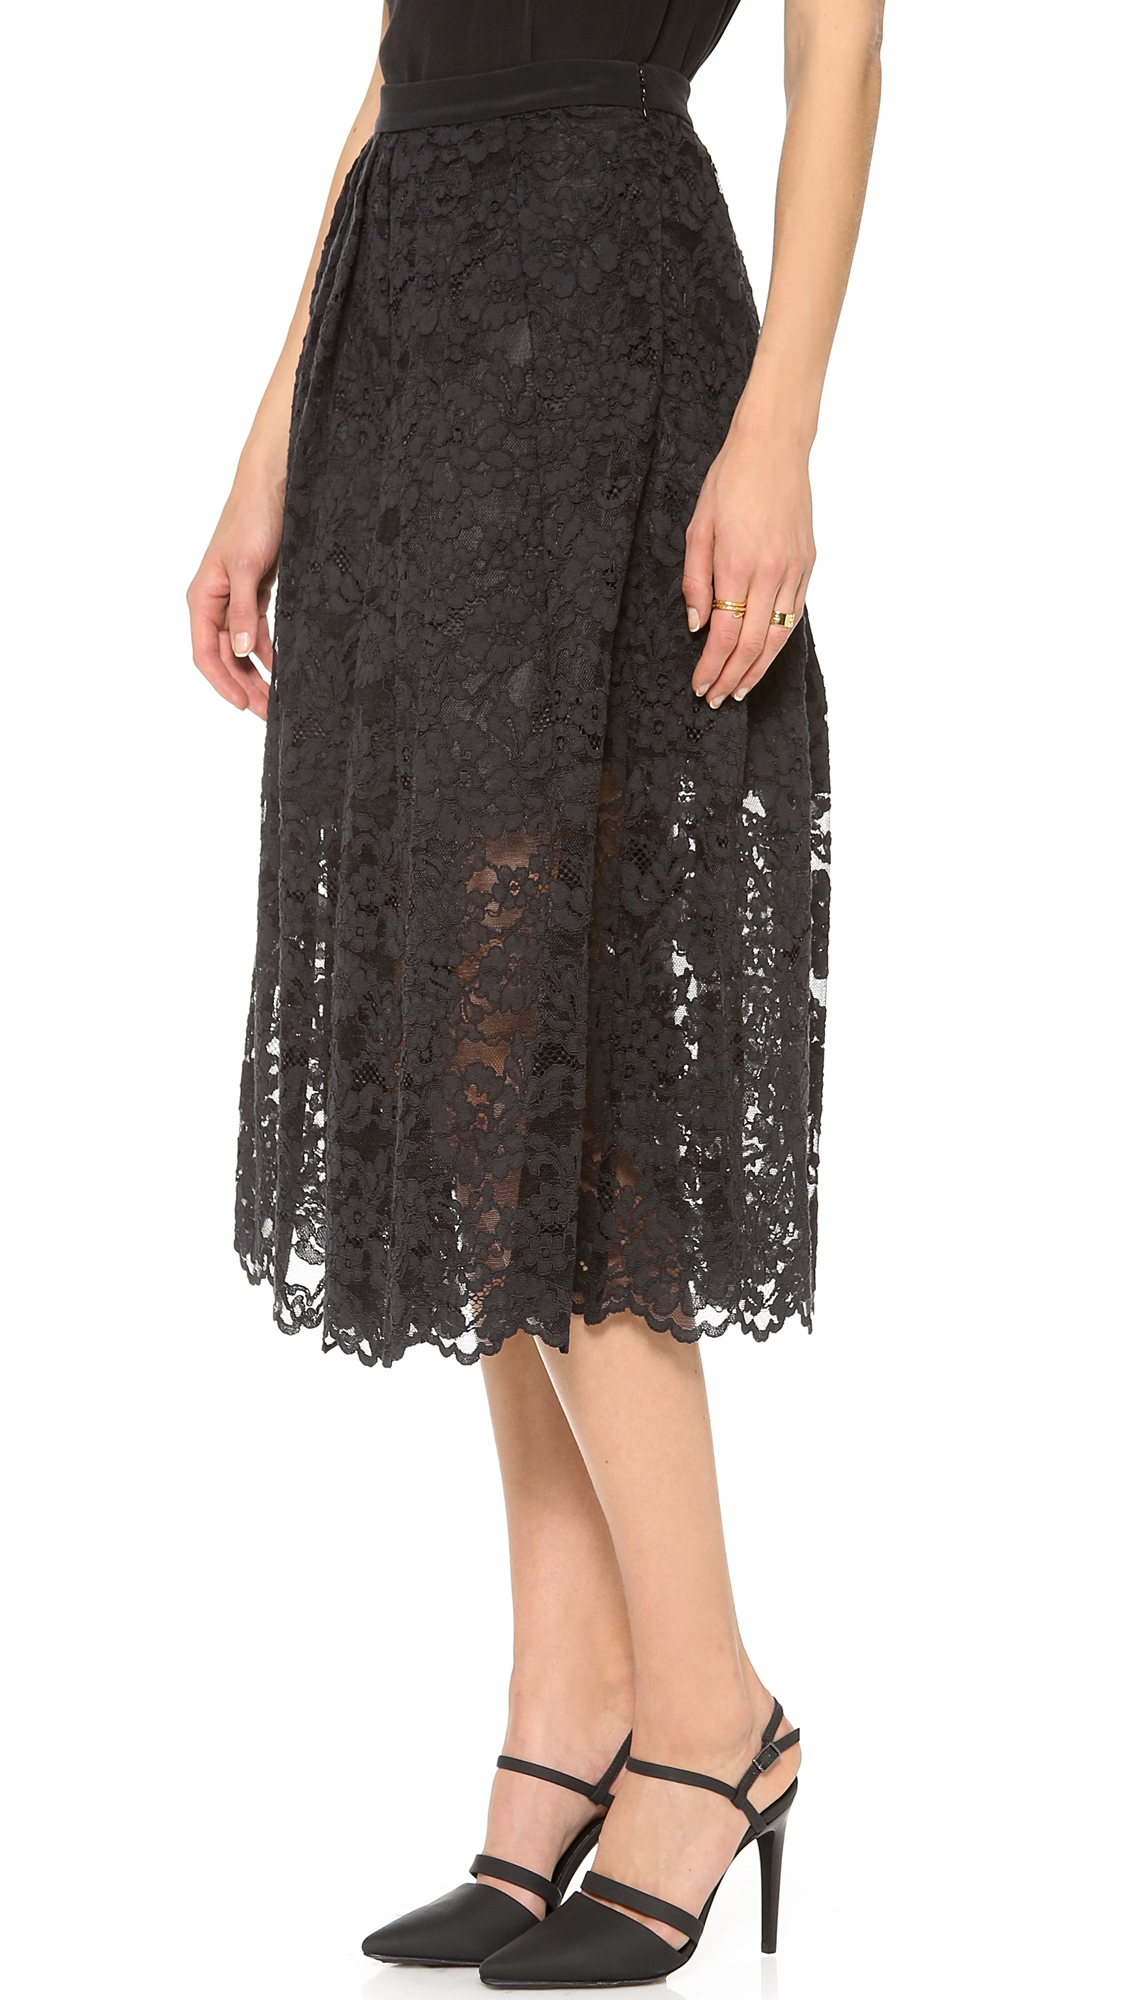 Tibi Lace Party Skirt in Black - Lyst